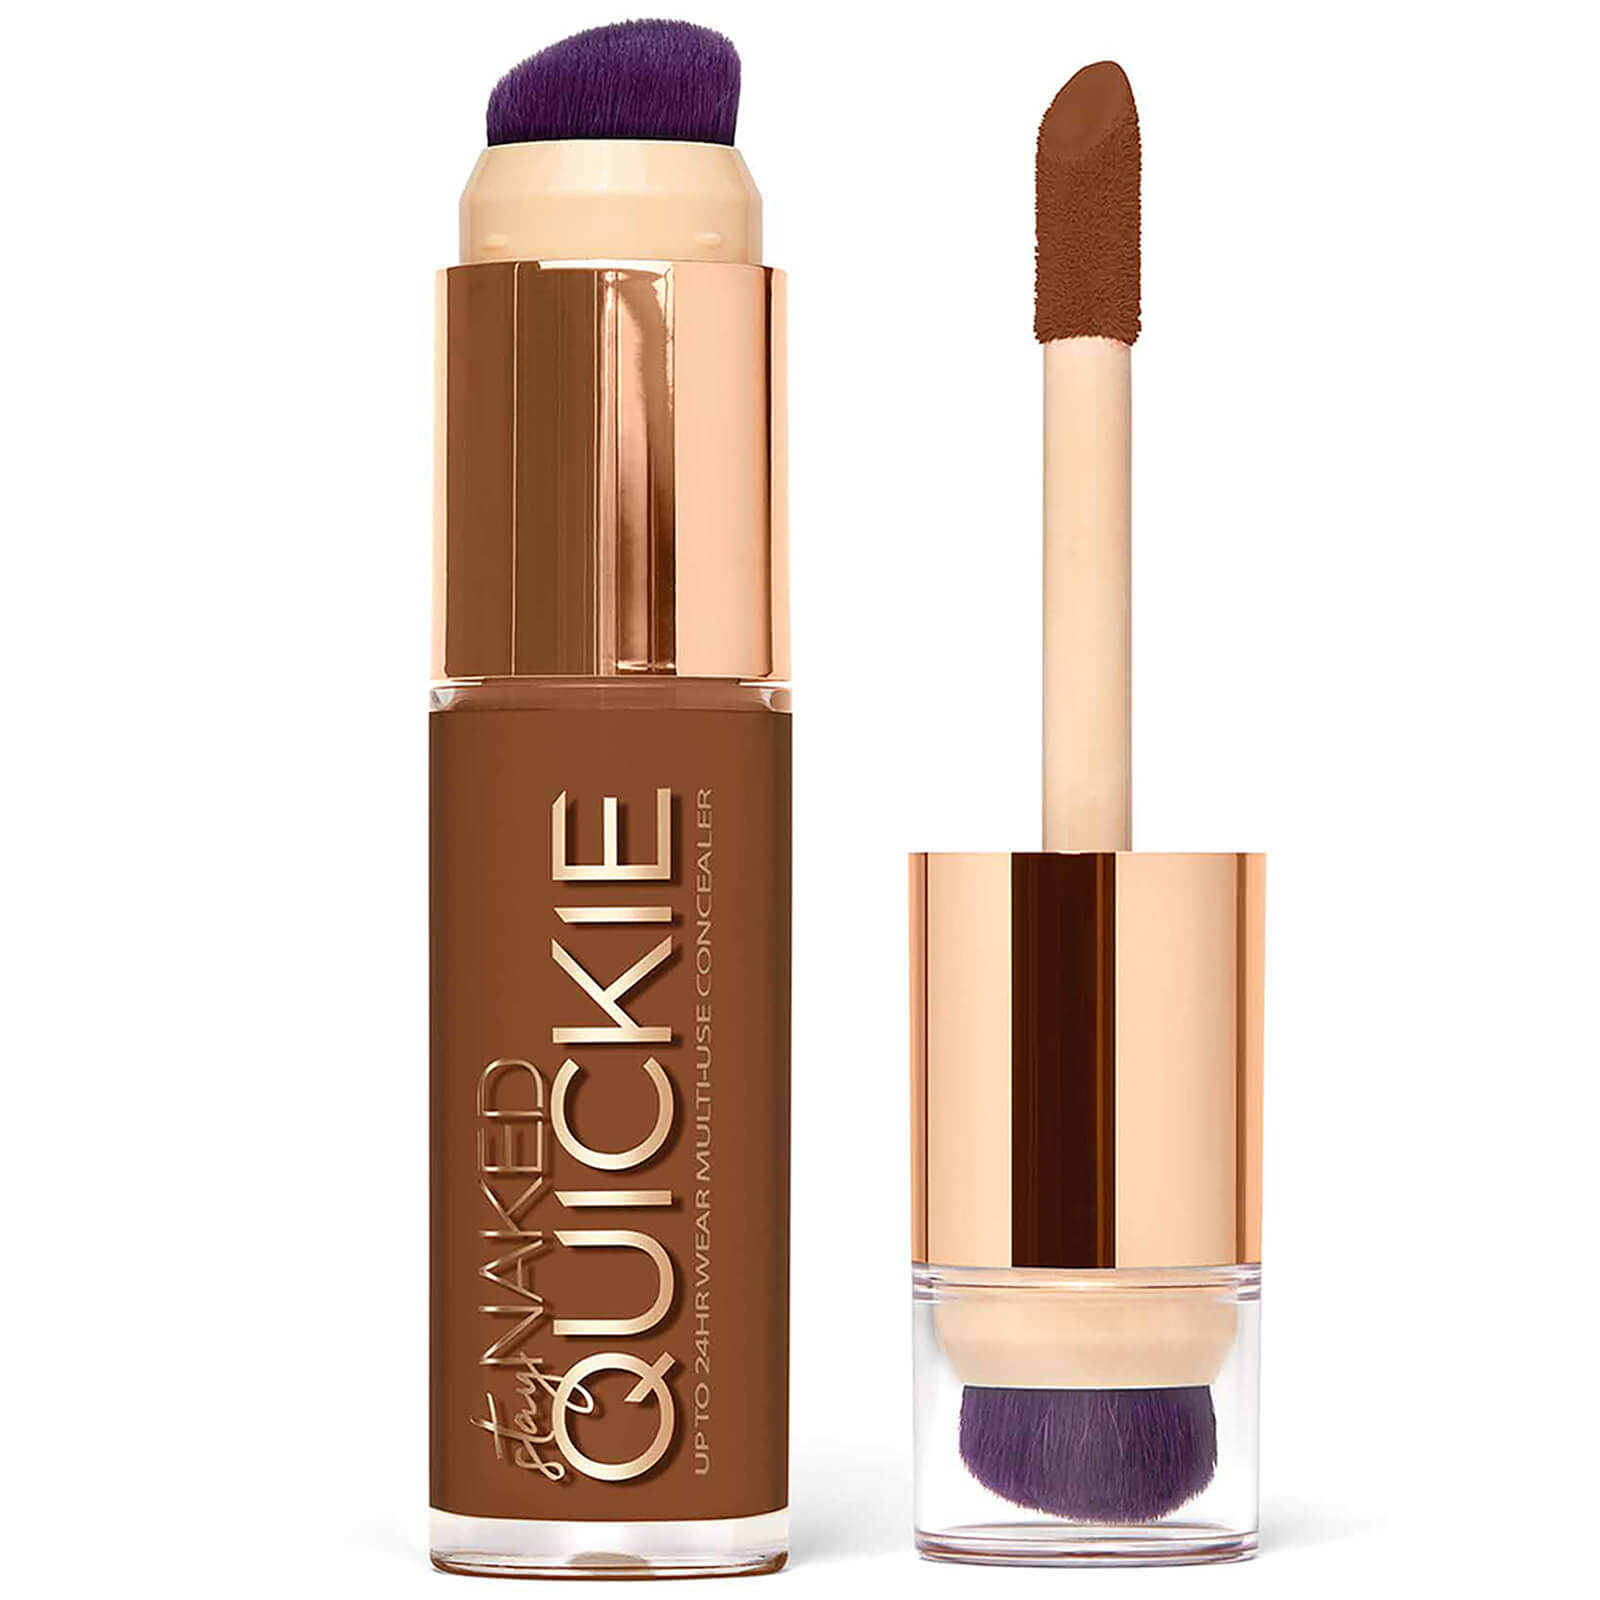 Urban Decay Stay Naked Quickie Concealer 16.4ml (Various Shades) - 80NN